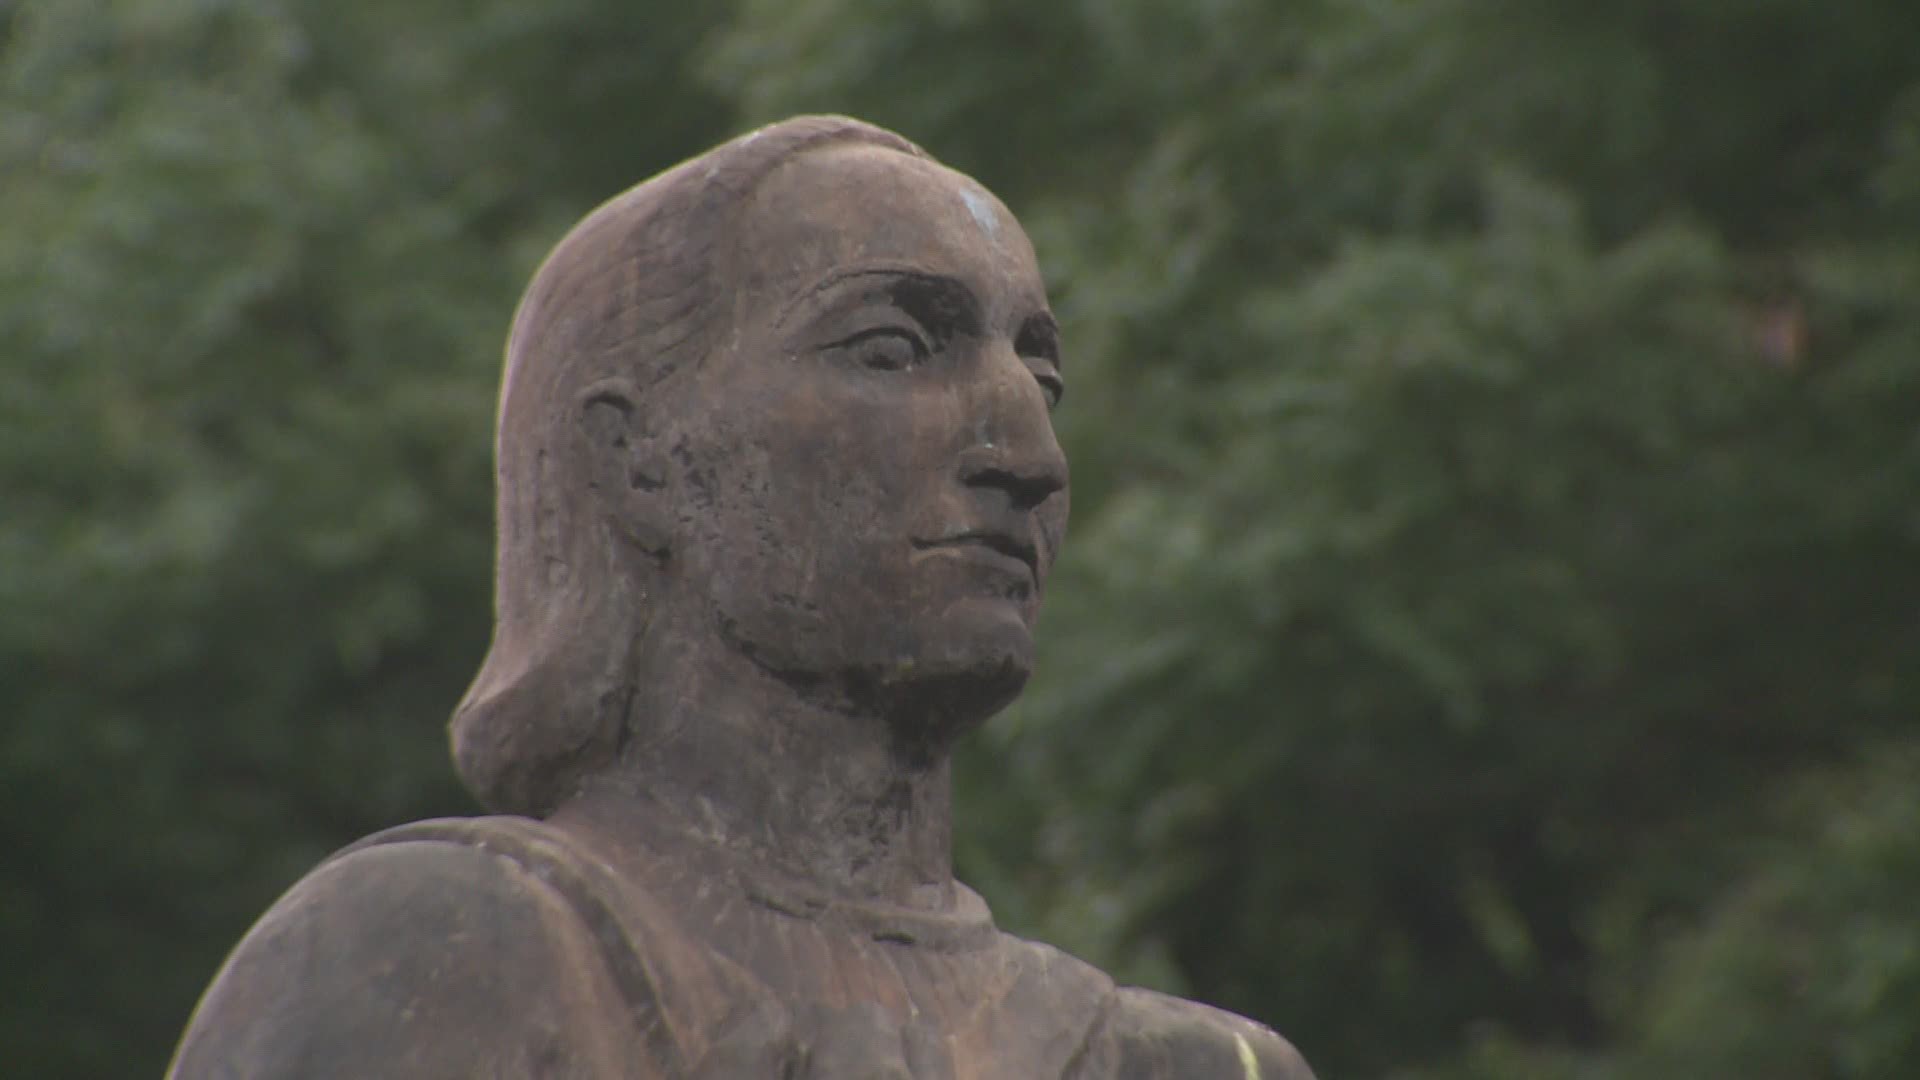 Statues in New Haven, Hartford, and Bridgeport have already been removed.